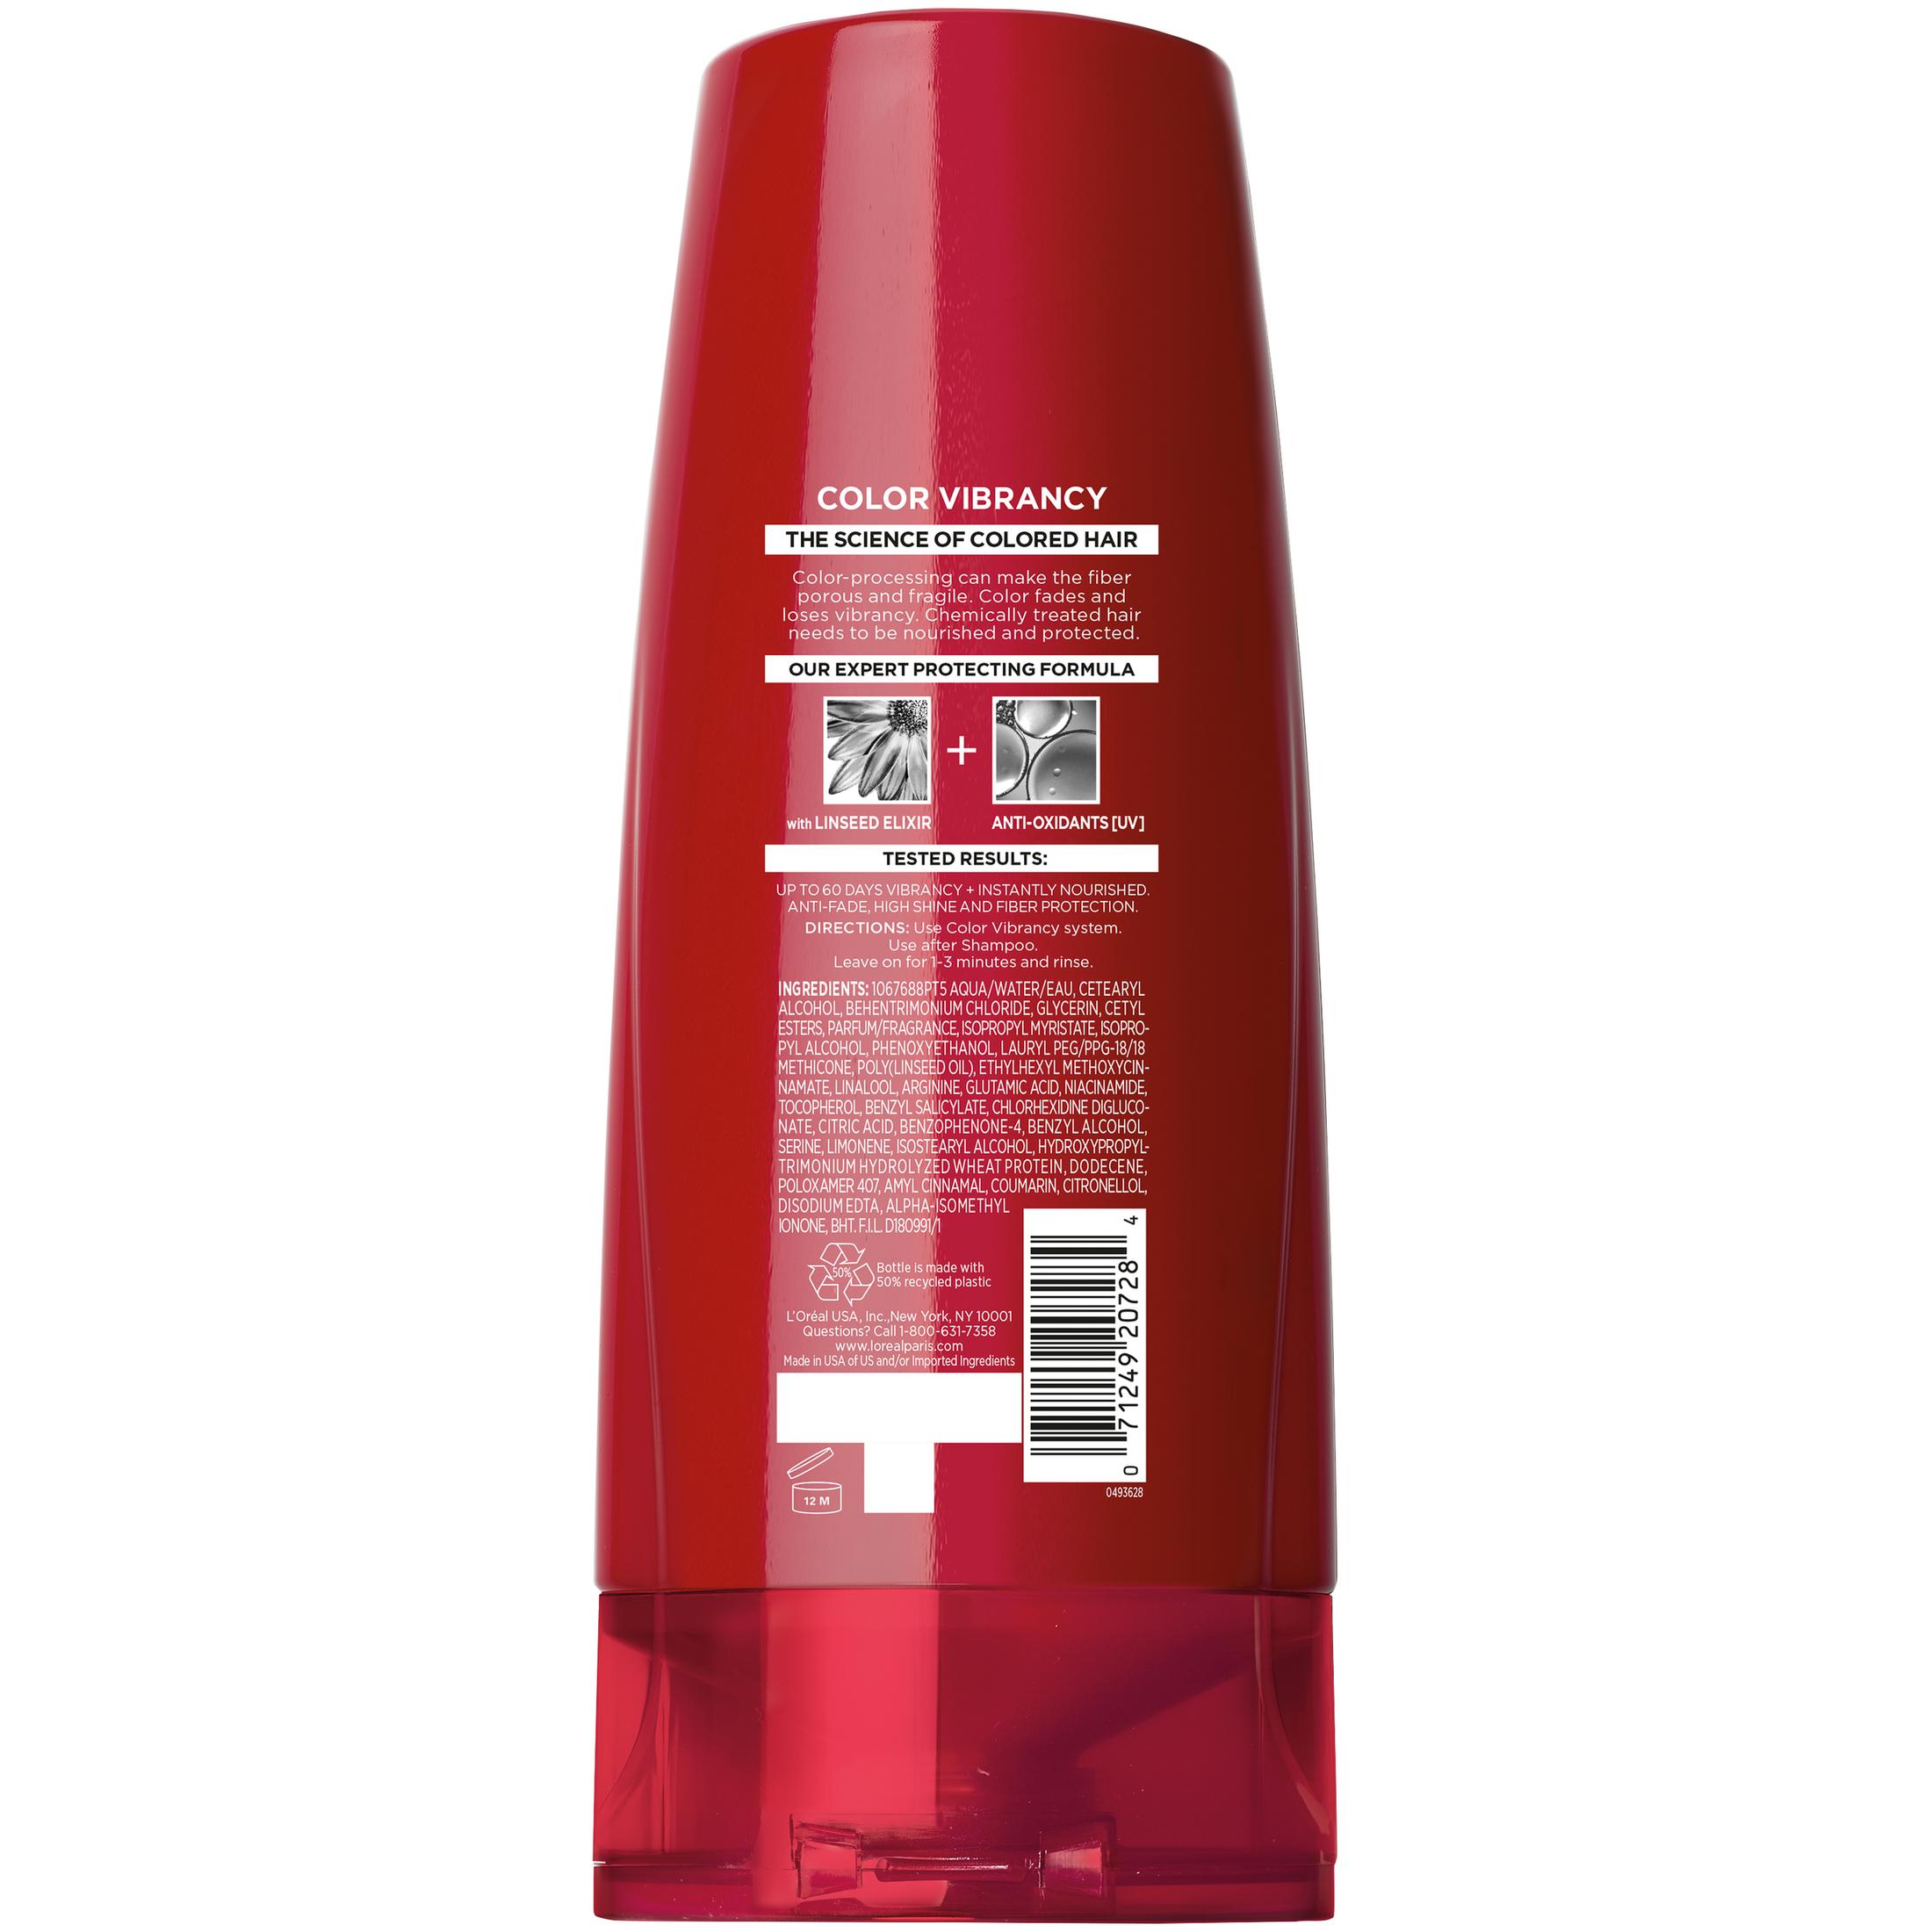 L'Oreal Elvive Color Vibrancy Protecting Conditioner with Linseed Elixir, 12.6 fl oz - image 3 of 7